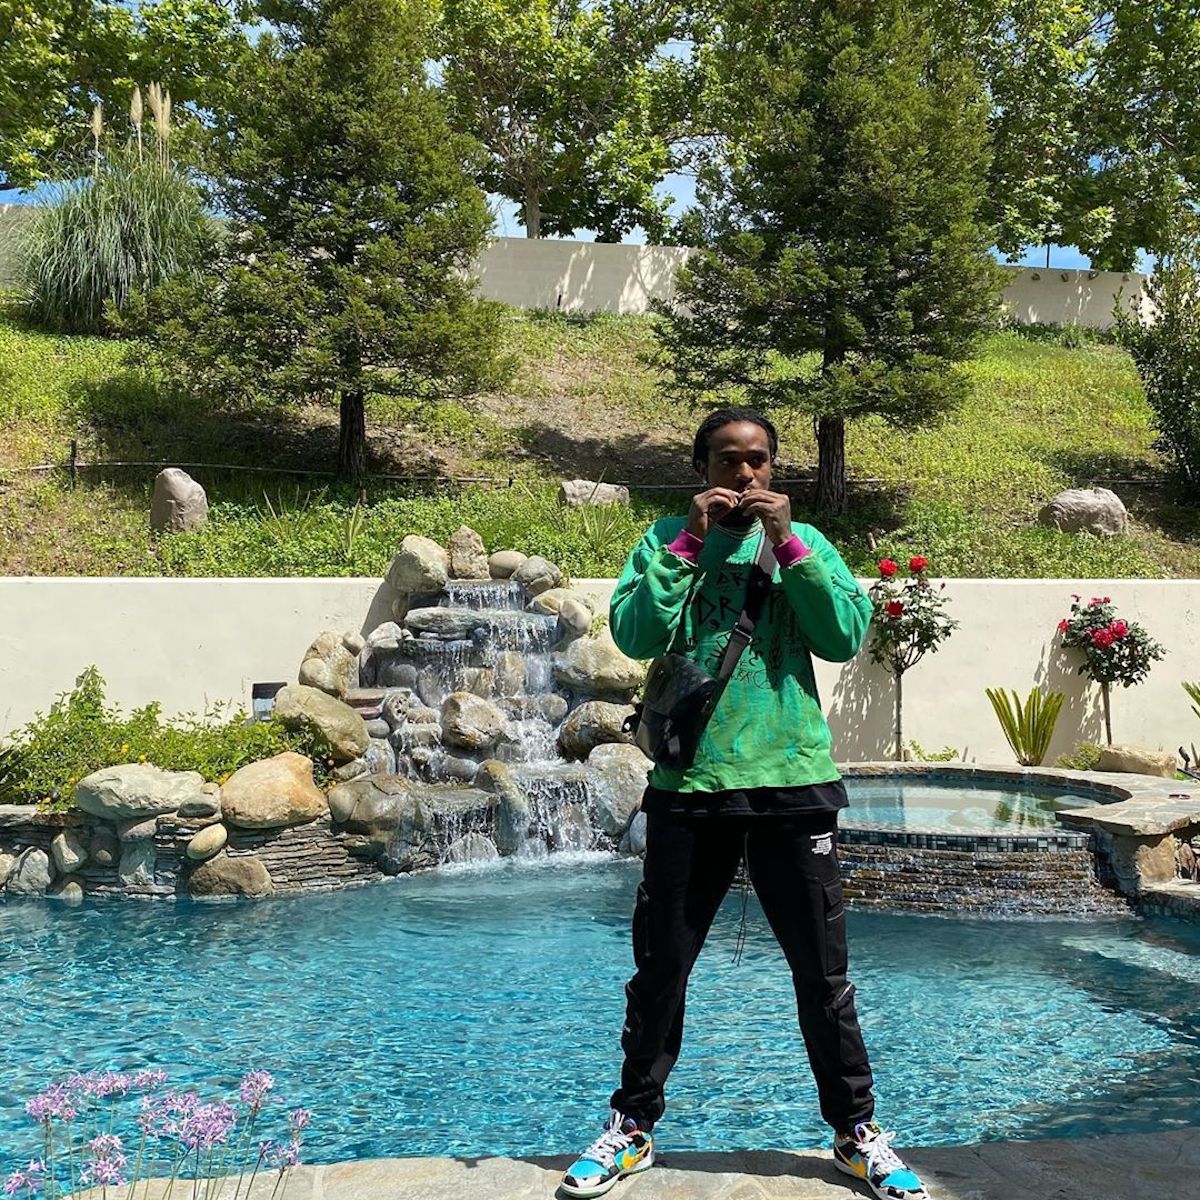 SPOTTED: Quavo Huncho Poolside in Louis Vuitton & Nike ‘Chunky Dunky’ Trainers